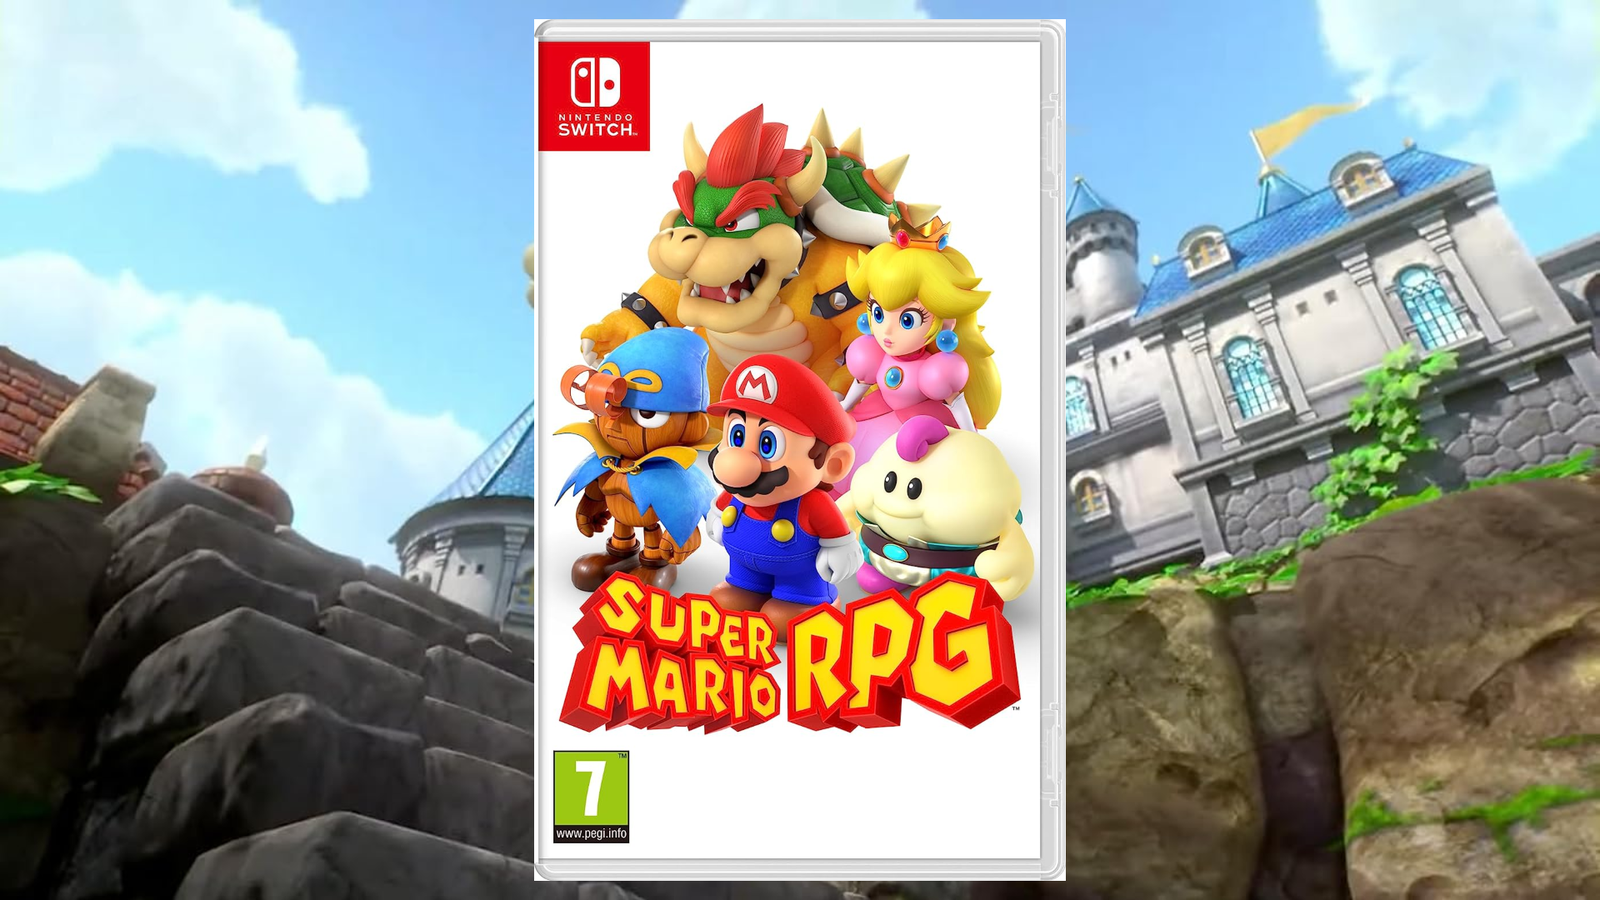 Super Mario RPG Release Date, When is Super Mario RPG Coming Out? - News